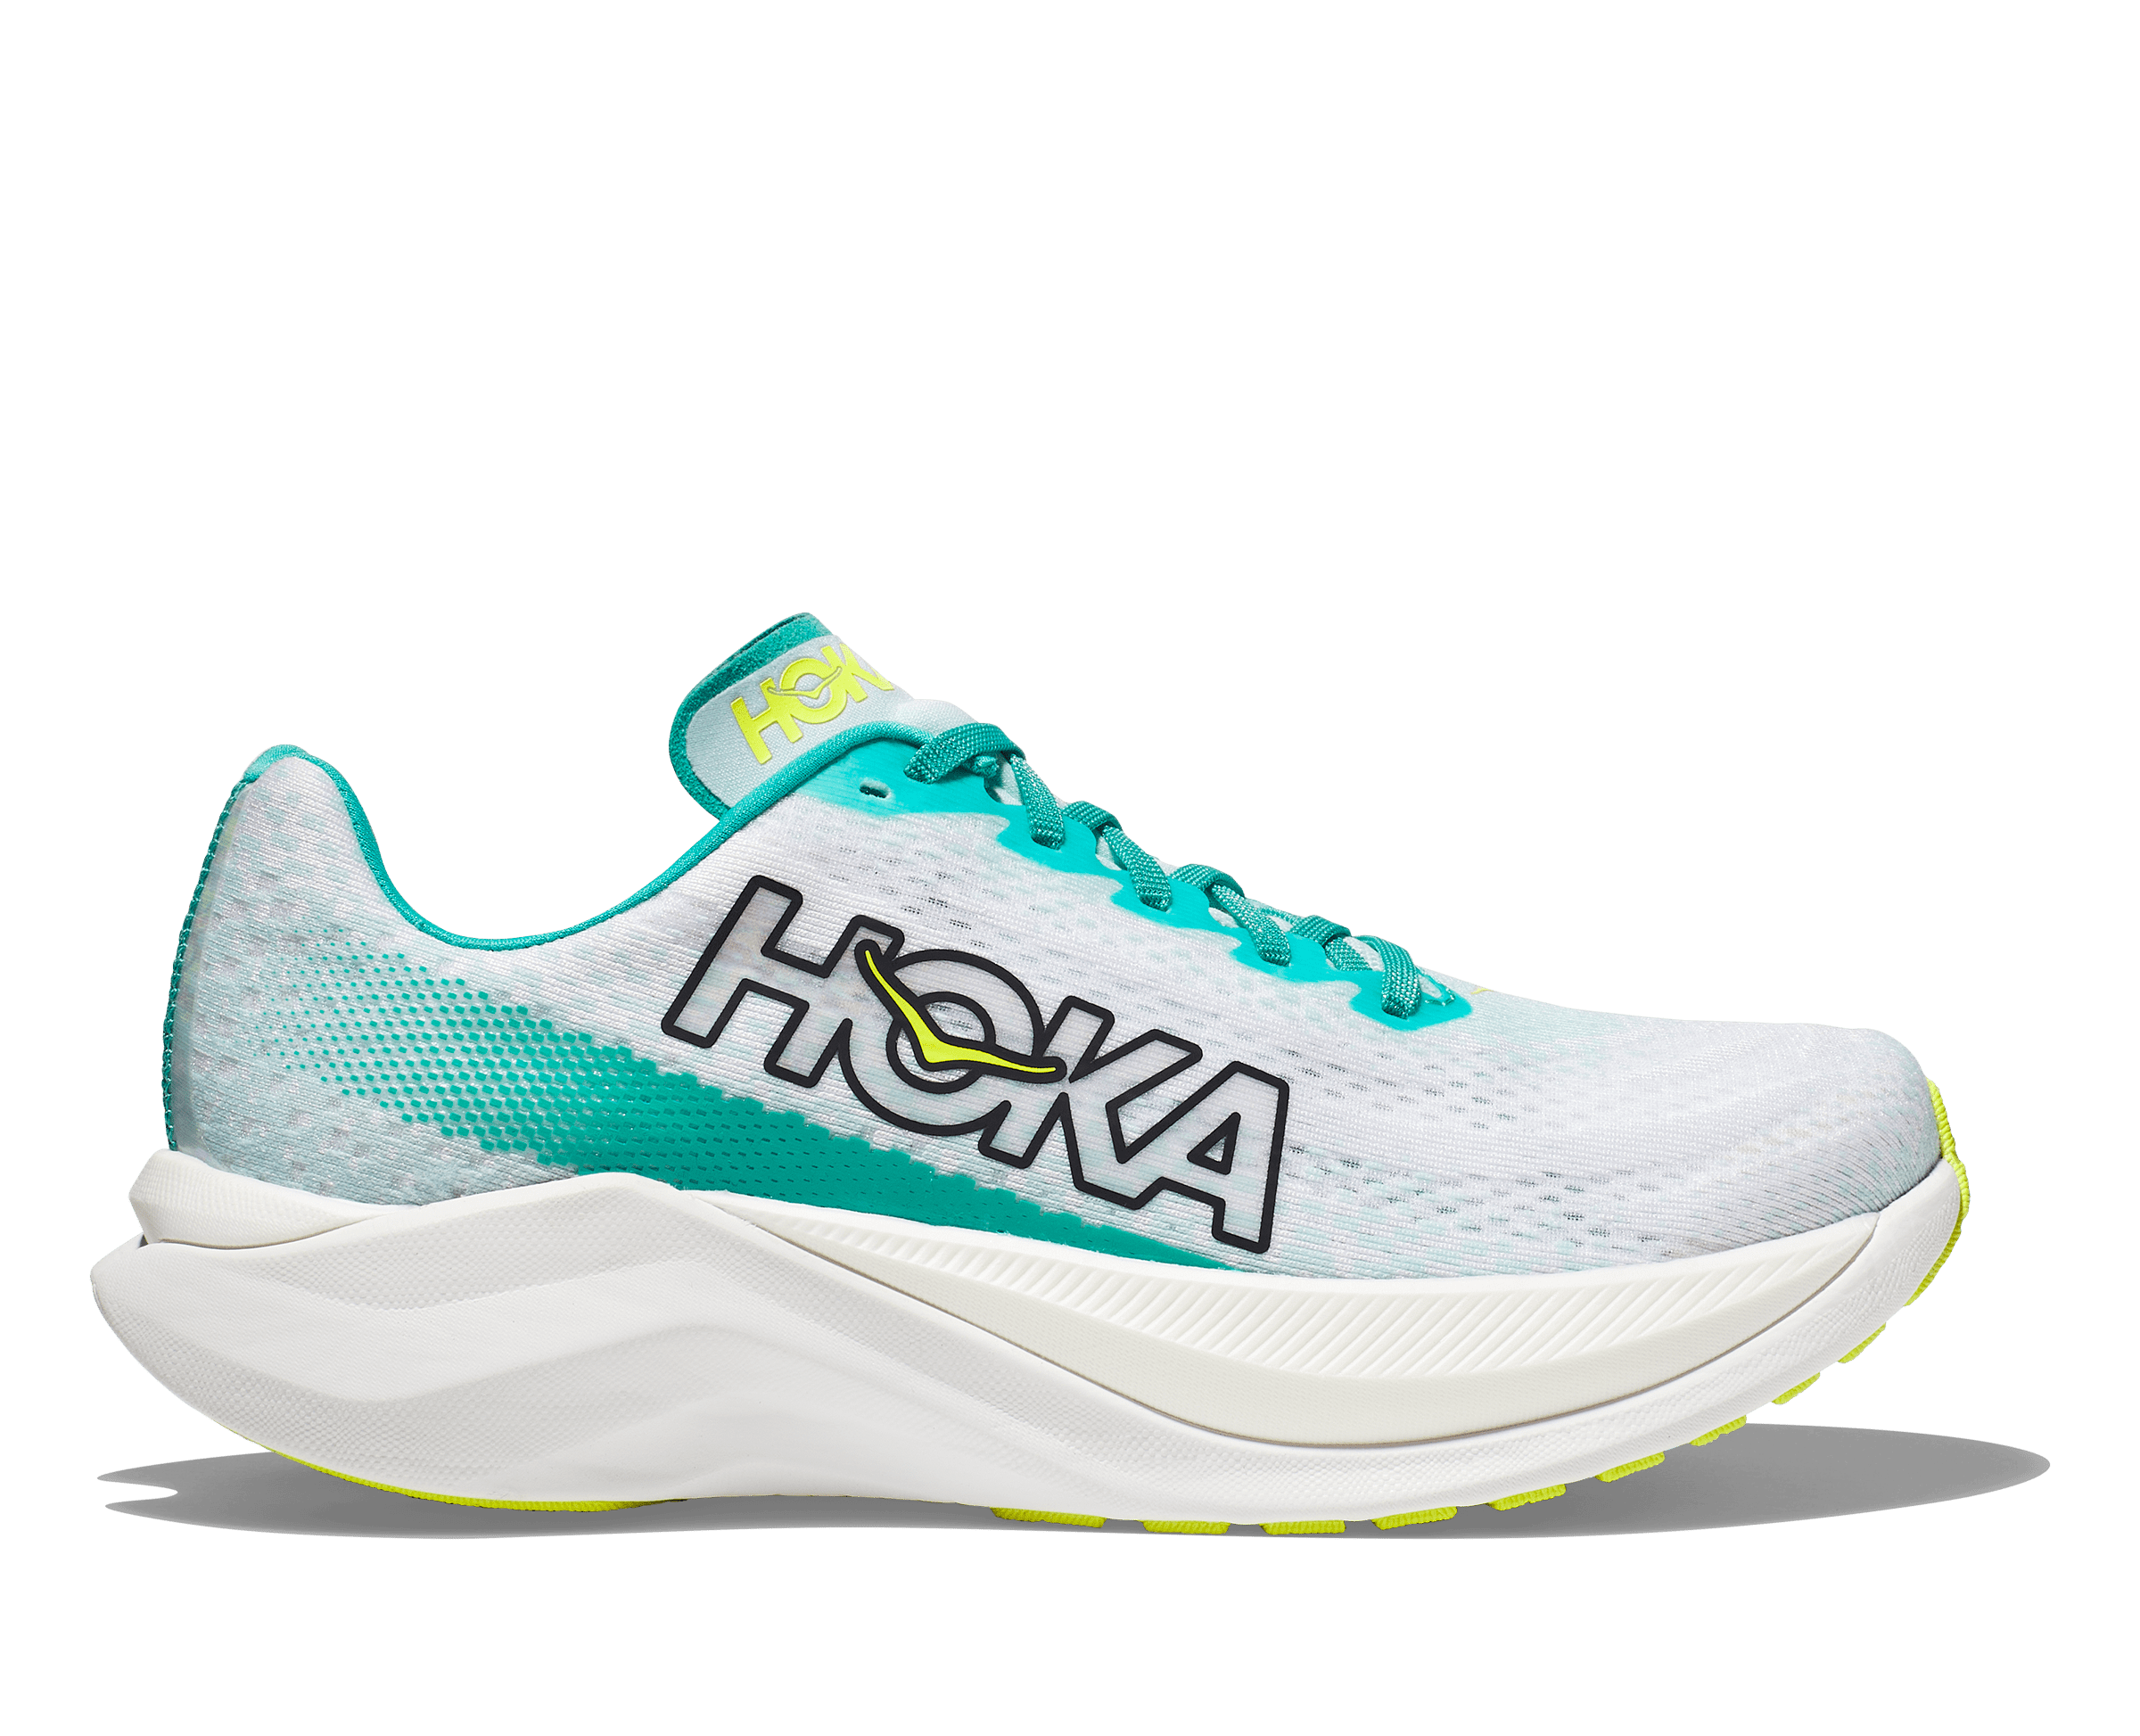 Lateral view of the Men's Mach X by HOKA in the color White/Blue Glass